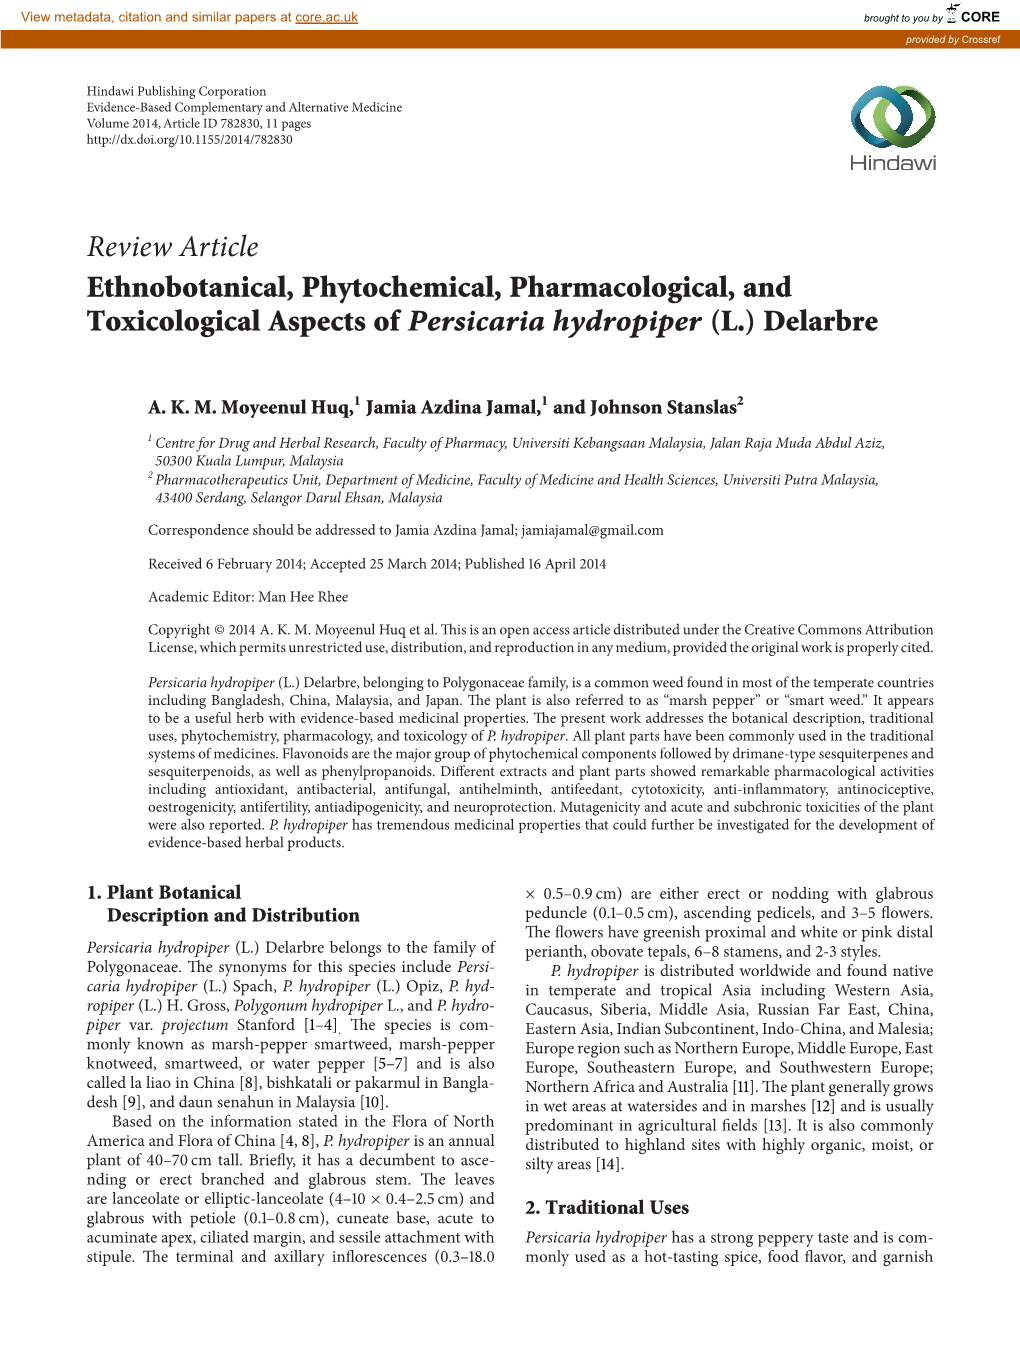 Review Article Ethnobotanical, Phytochemical, Pharmacological, and Toxicological Aspects of Persicaria Hydropiper (L.) Delarbre